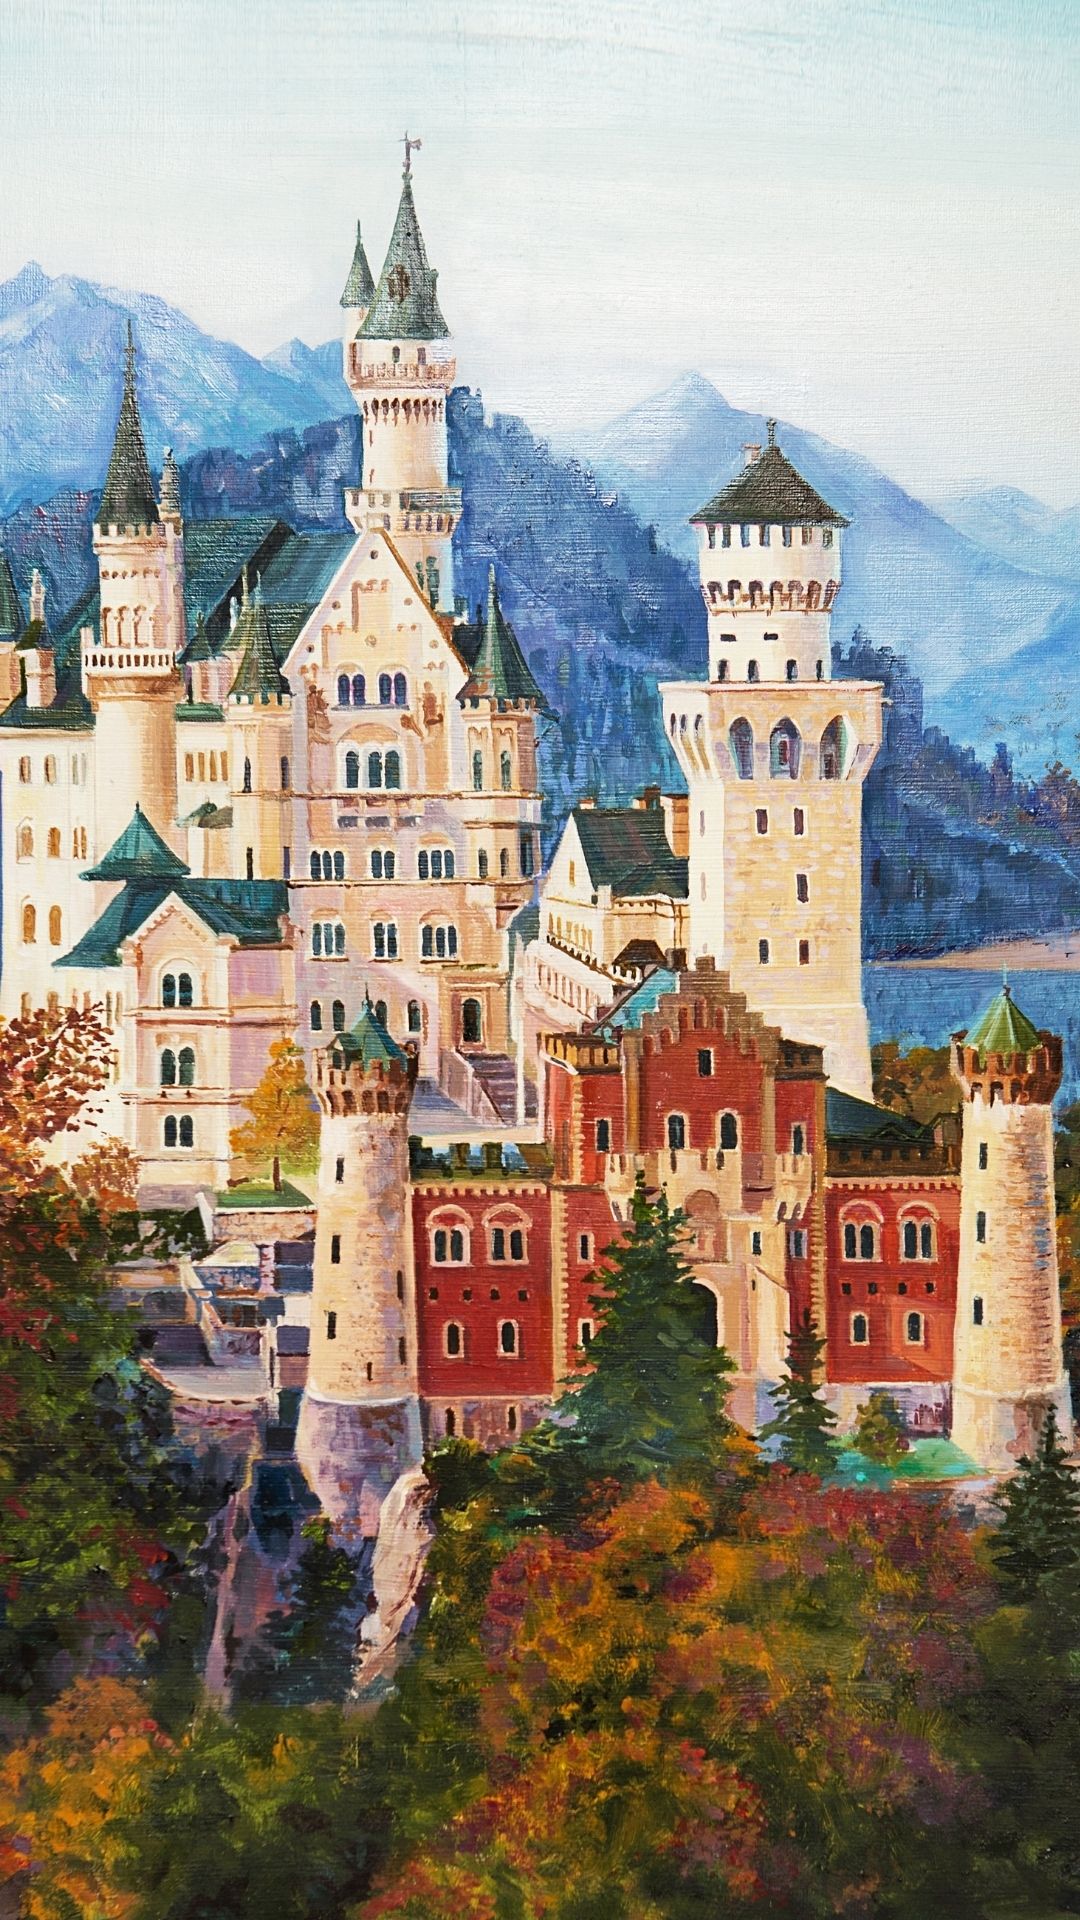 Schloss Neuschwanstein, the iconic fairy-tale castle in Bavaria, Germany, surrounded by scenic mountain landscapes.